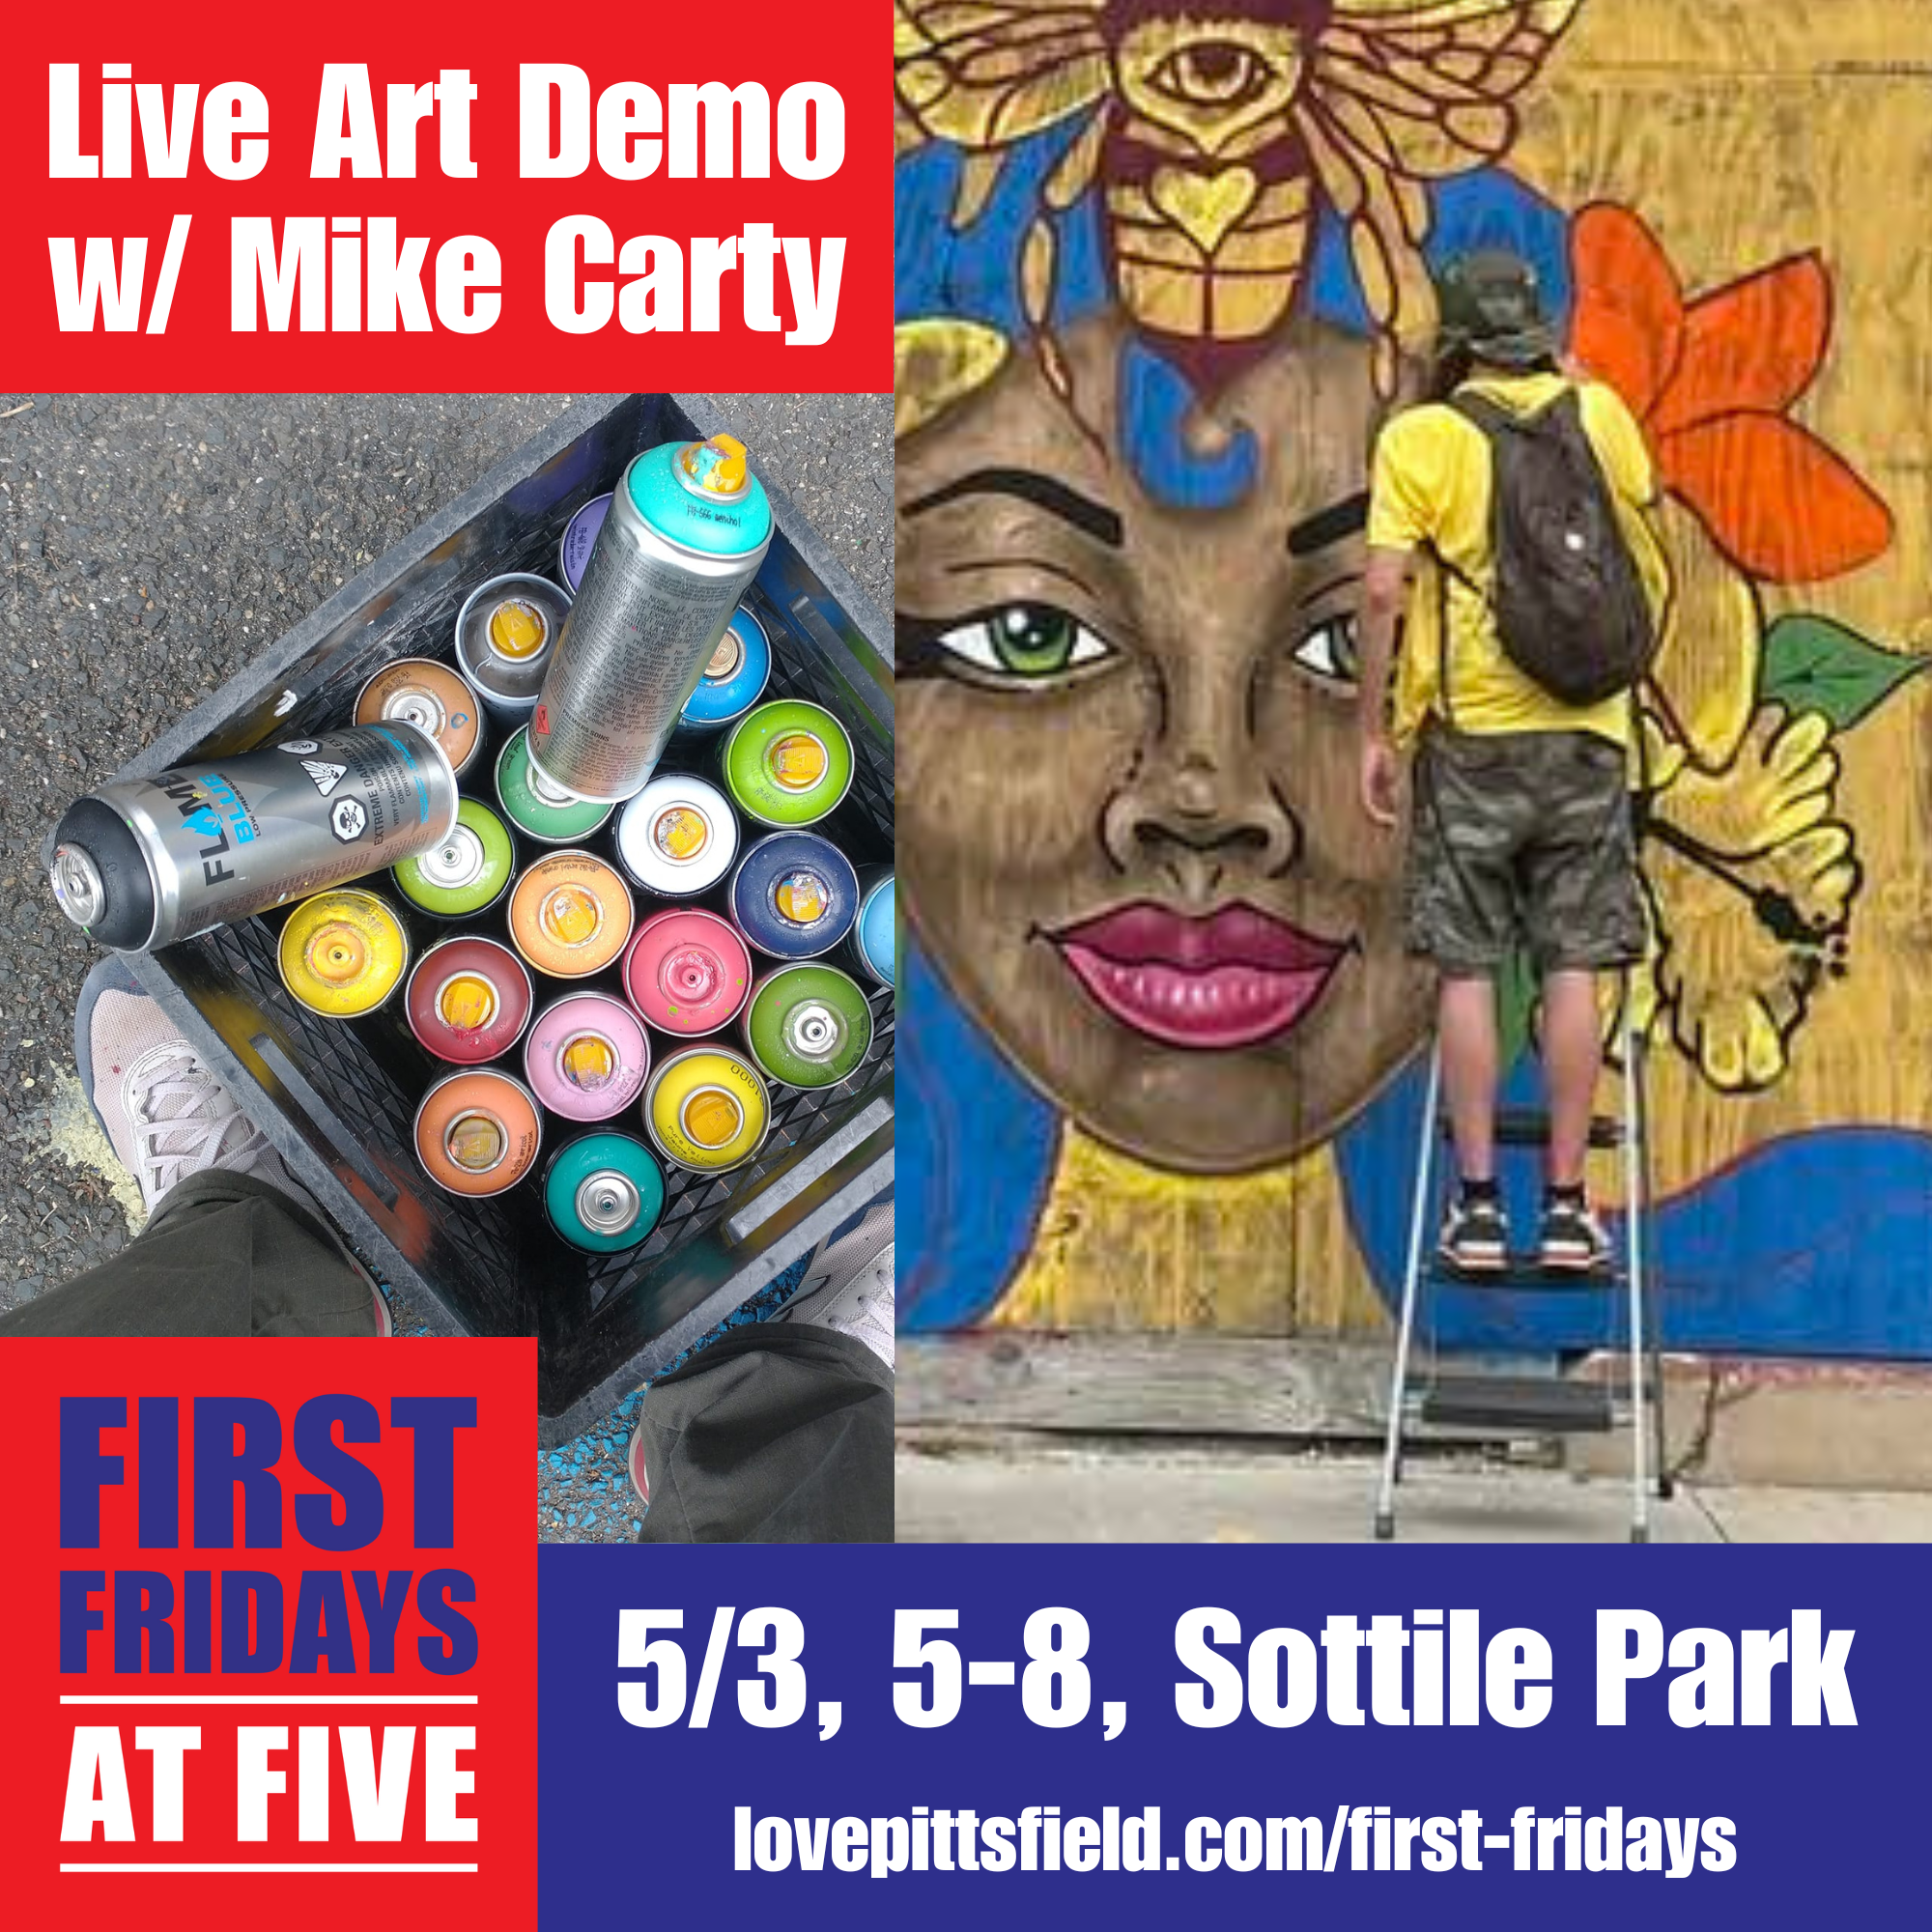 Live art demonstration by artist Michael Carty